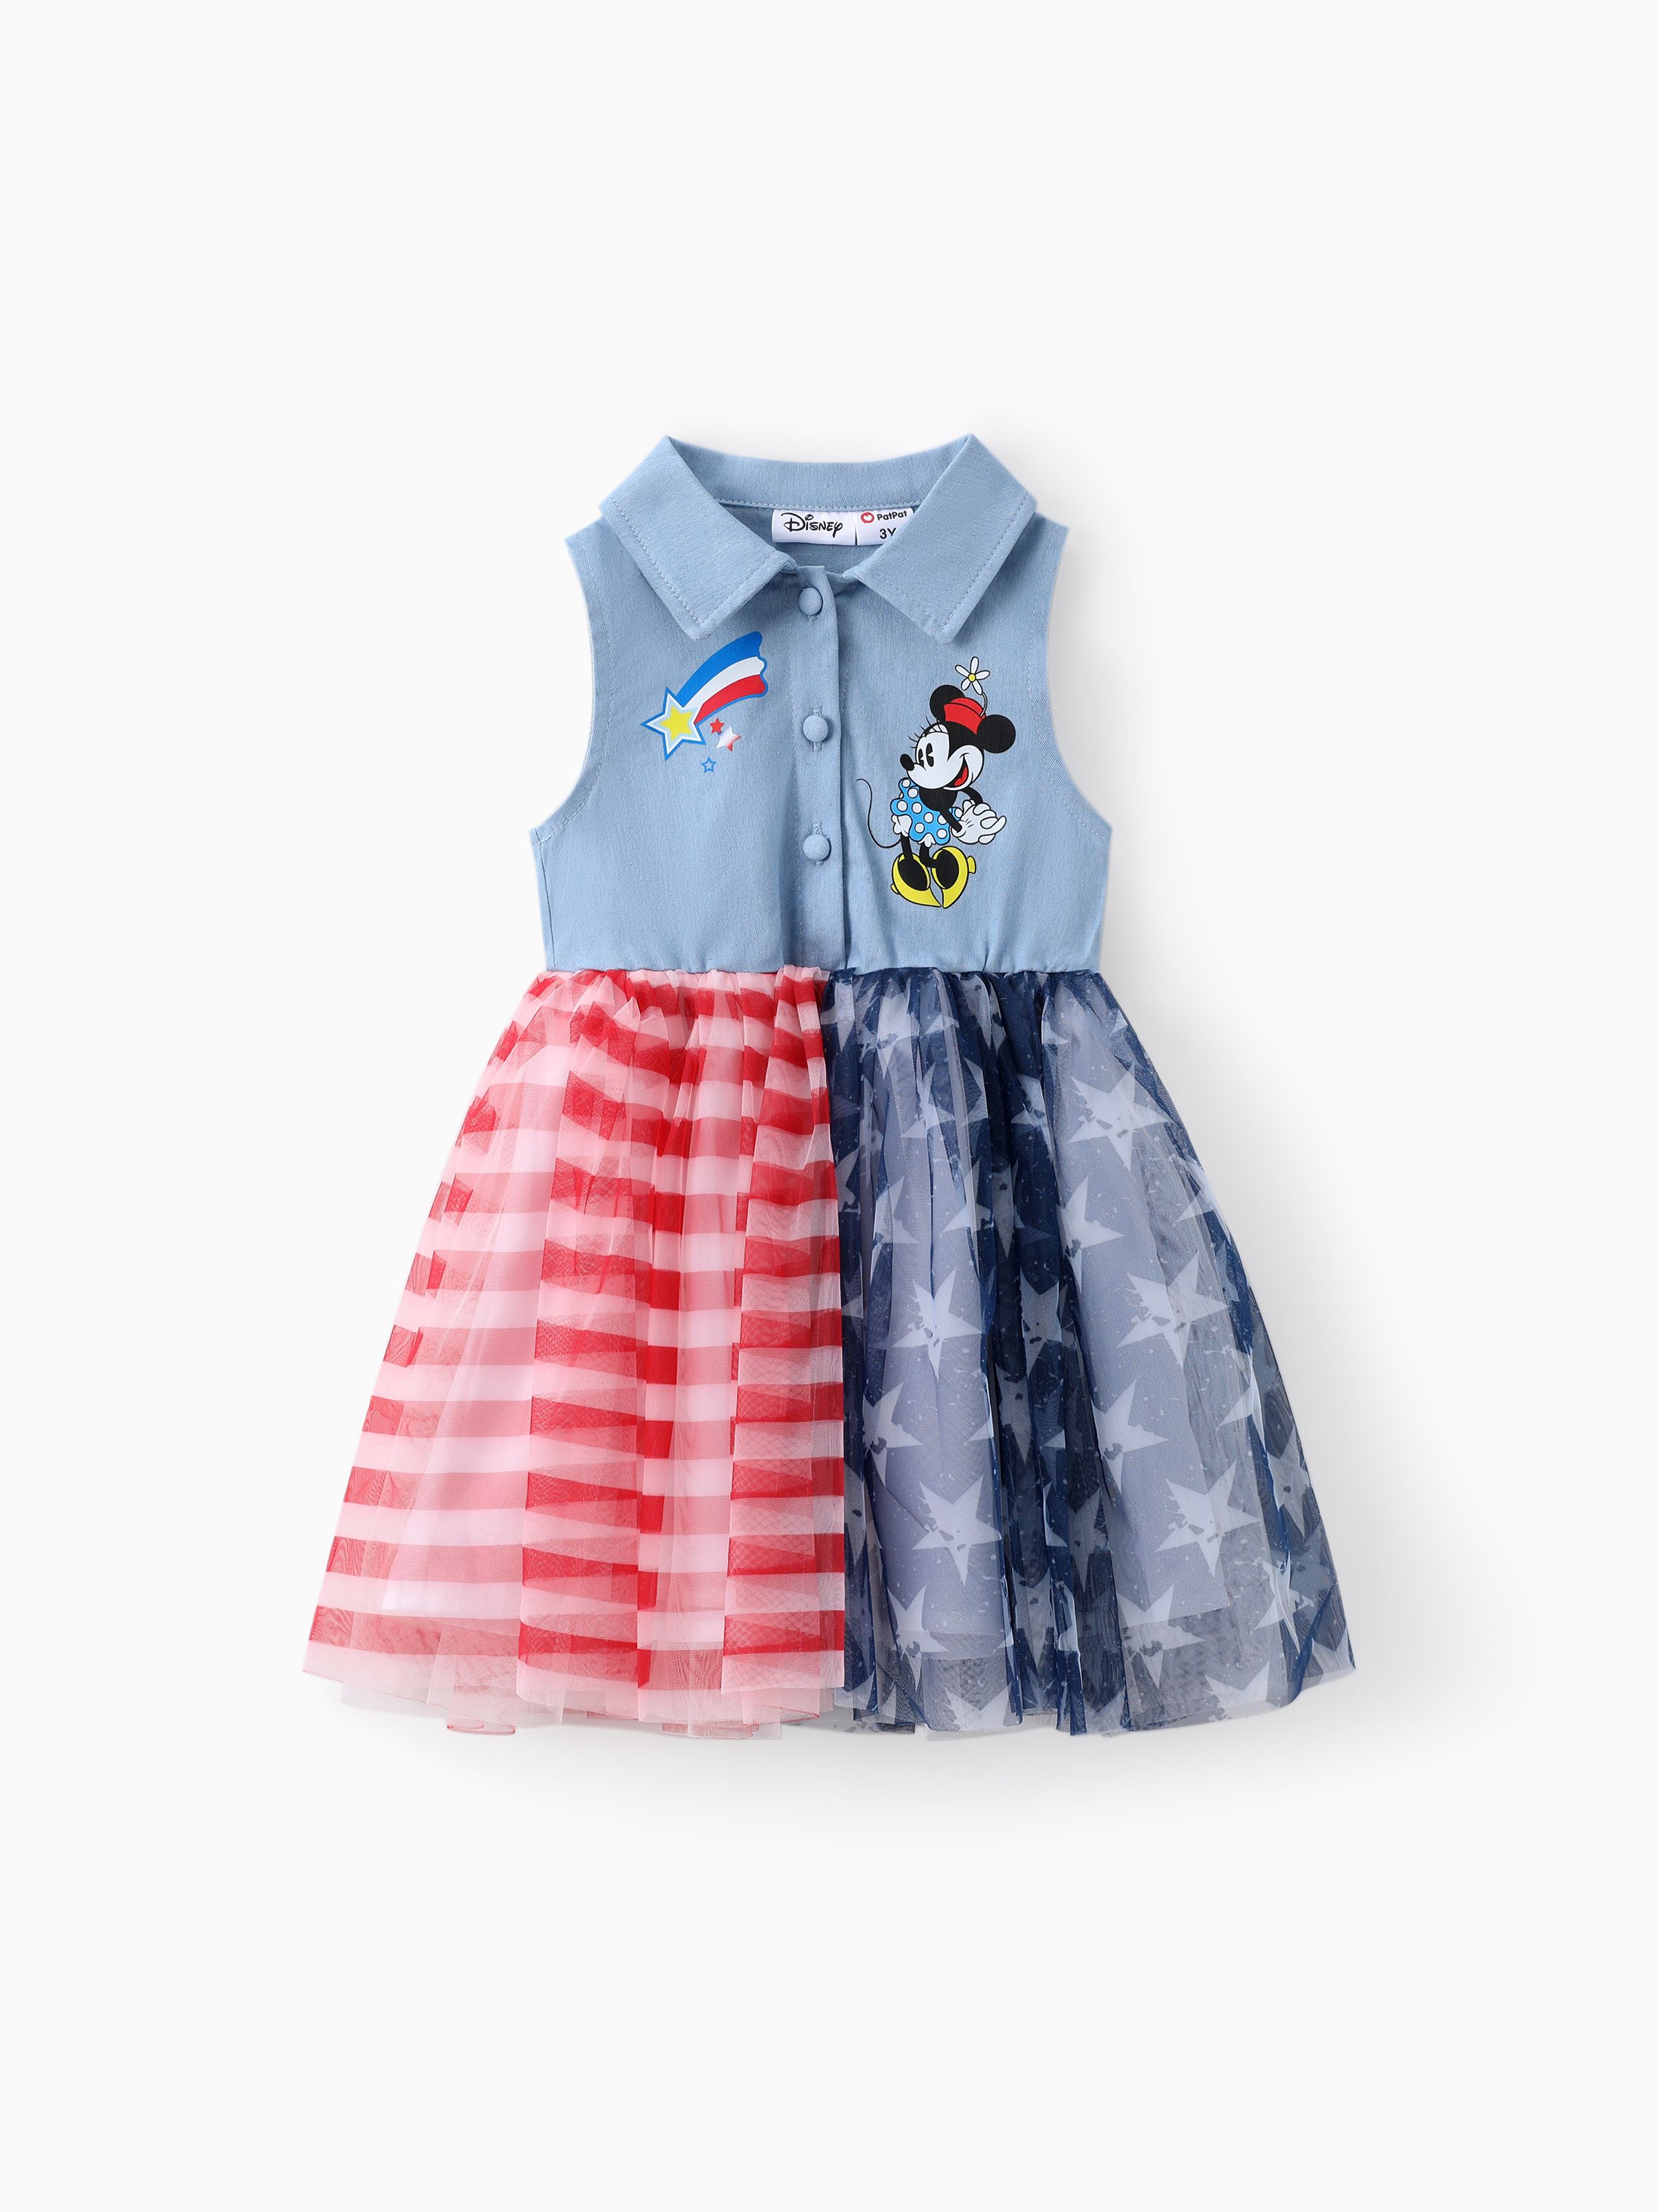 

Disney Mickey and Friends Toddler Girls Independence Day 1pc Star Character Print Denim-like Sleeveless Dress